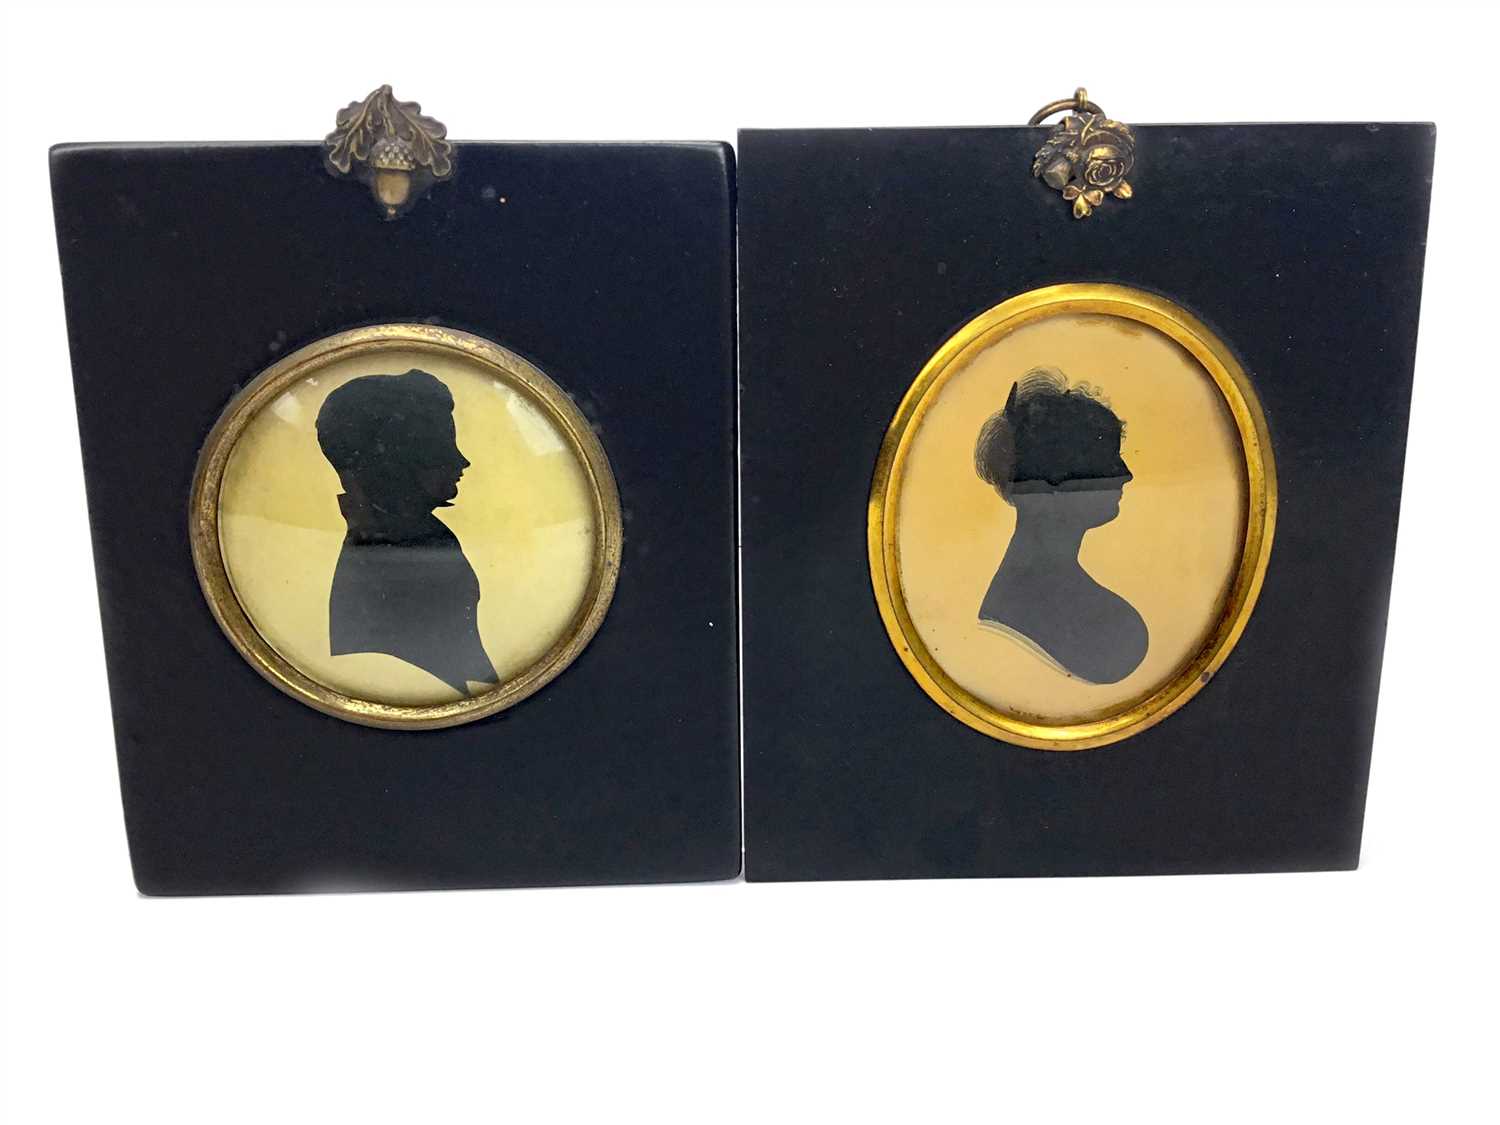 Lot 1669 - A LOT OF TWO LATE 18TH CENTURY SILHOUETTES